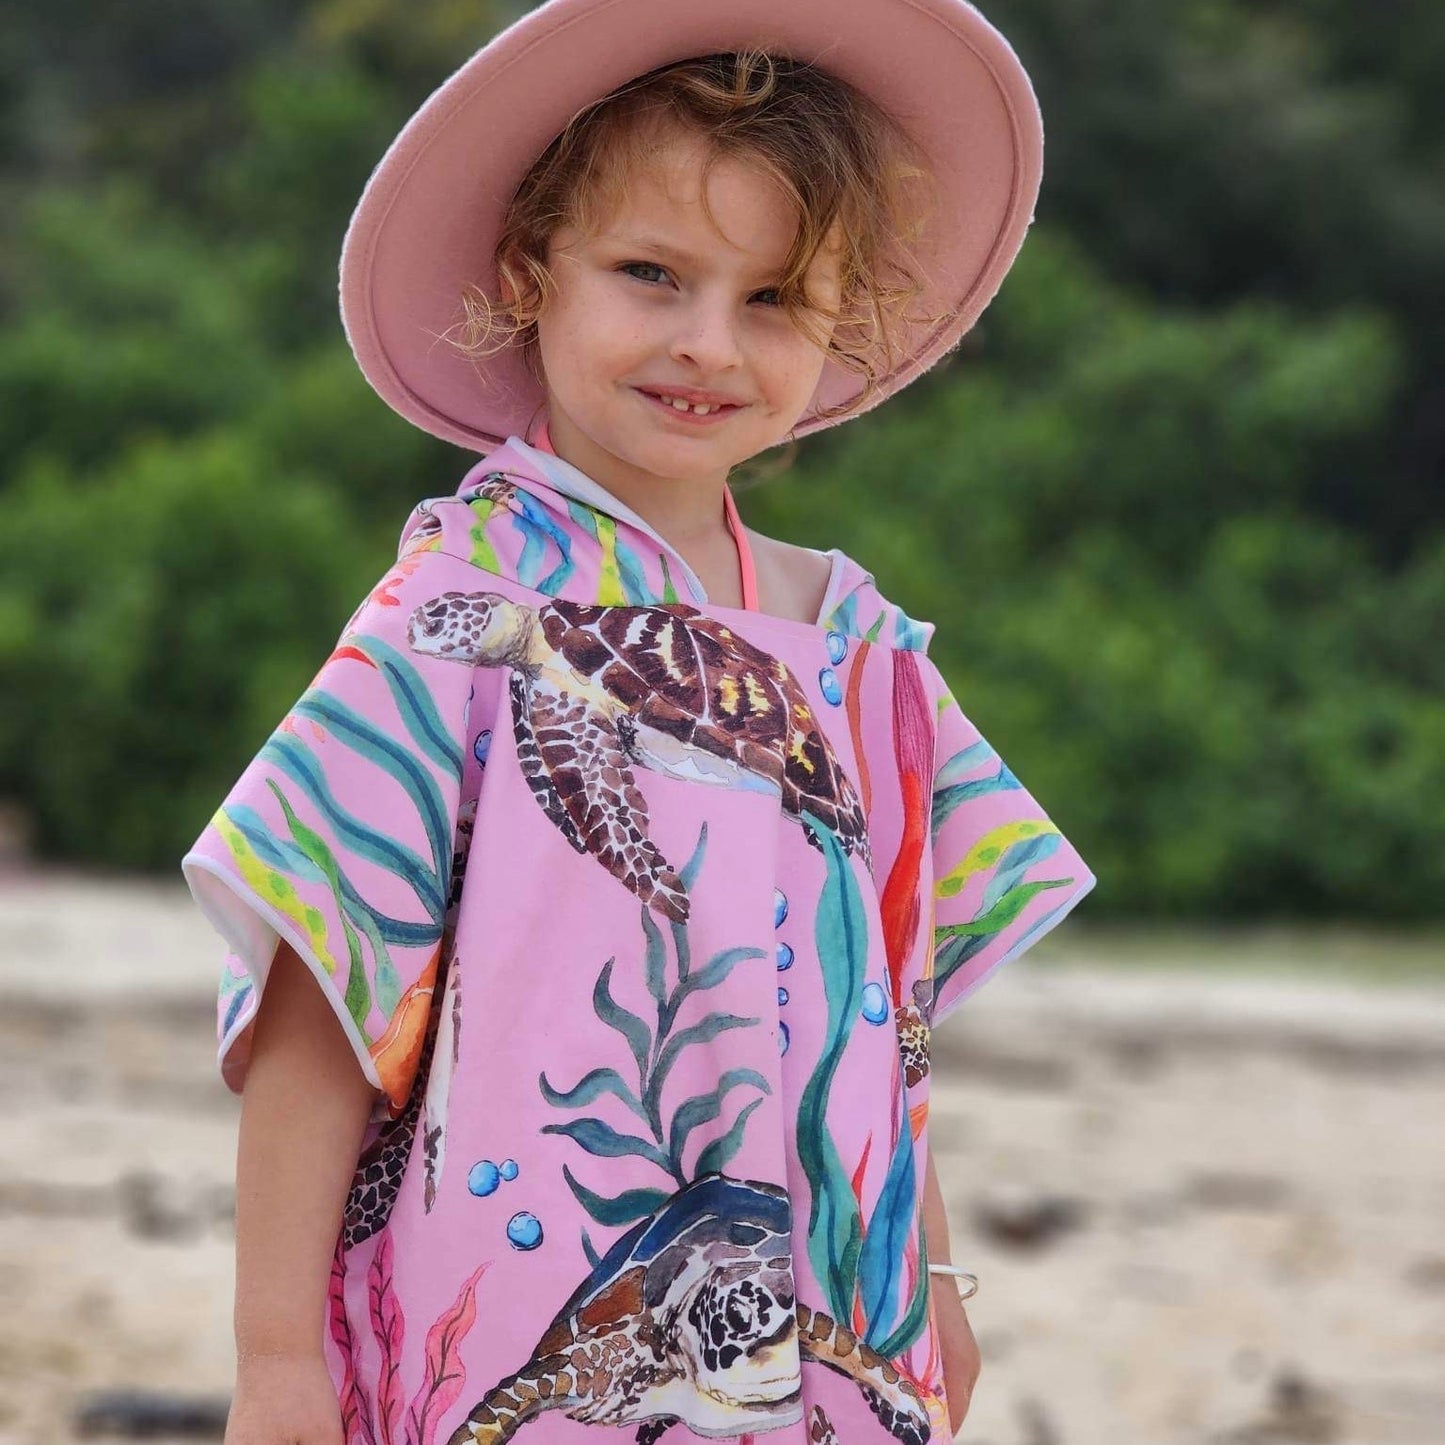 Turtle Cove girl with a sun hat not included